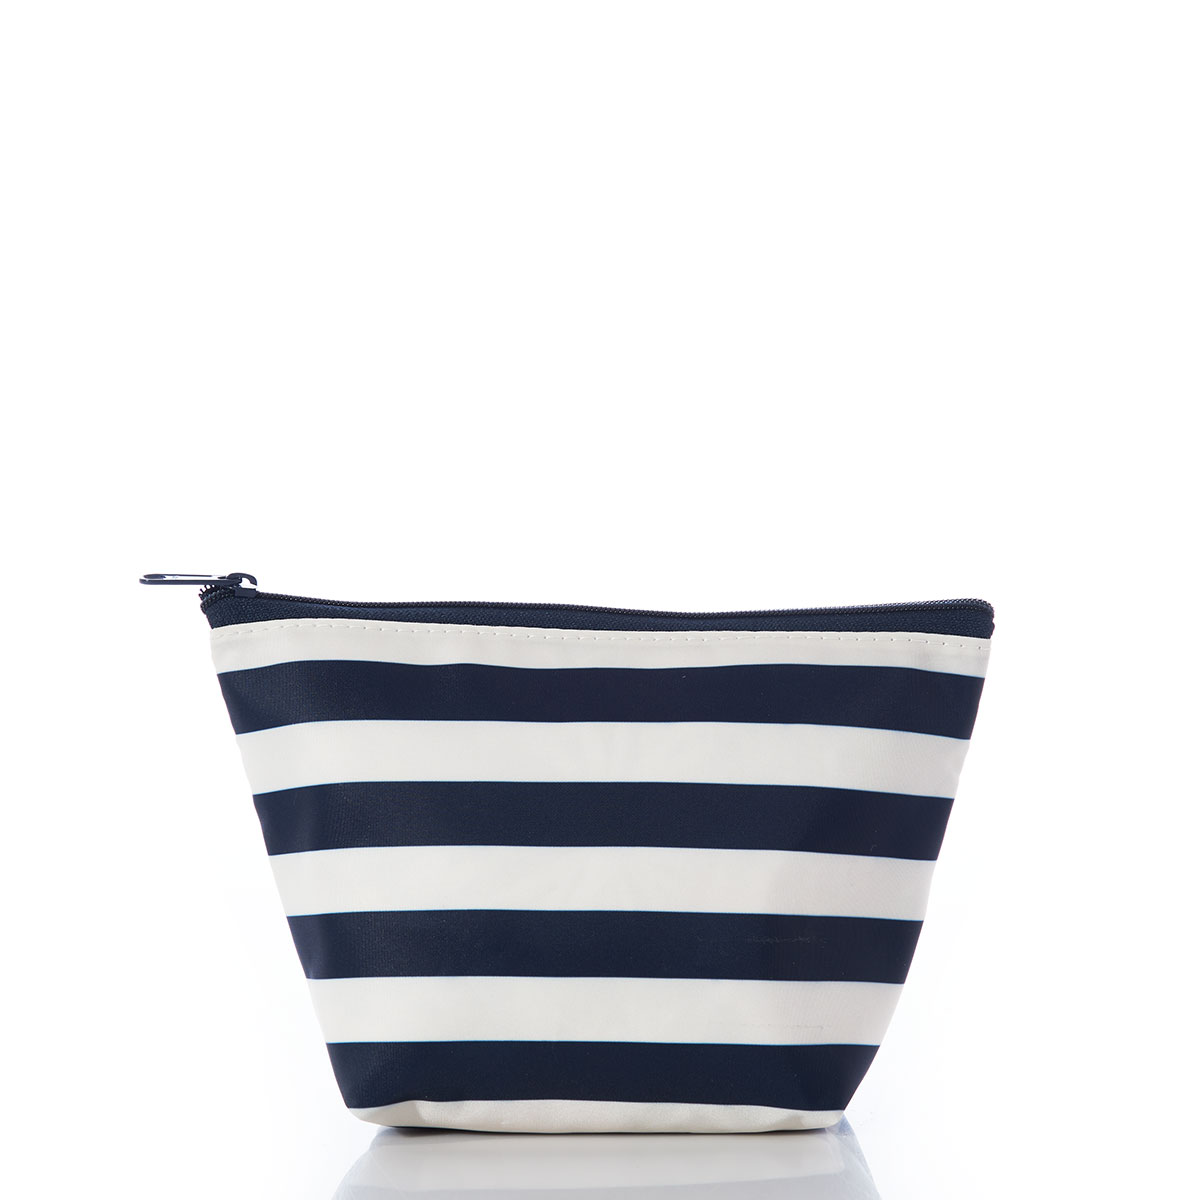 back view of bold navy and white stripes recycled sail cloth cosmetic pouch embellished with flowers in the bottom right corner